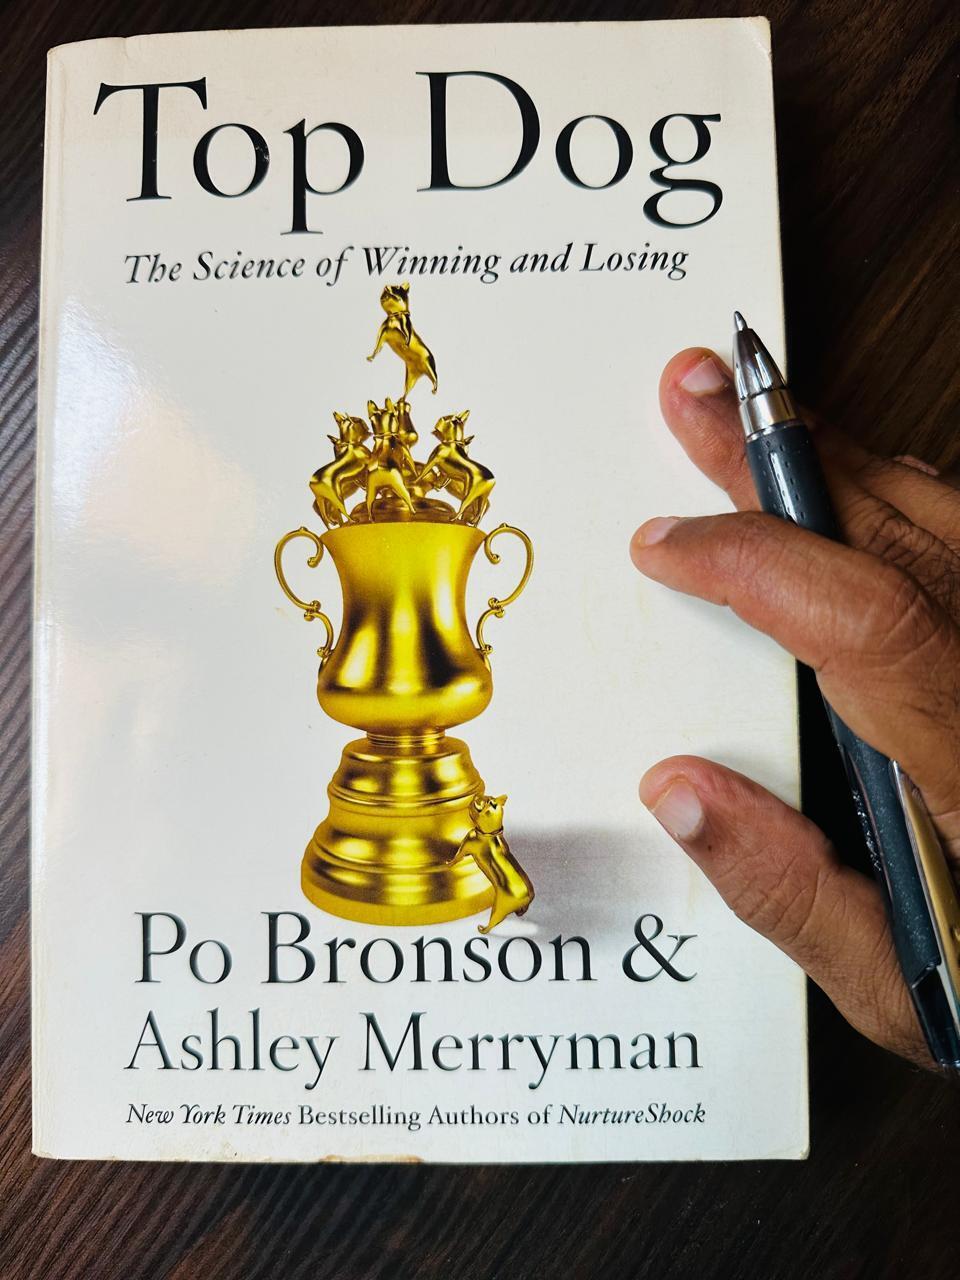 Top Dog: The Science of Winning and Losing by Ashley Merryman and Po Bronson